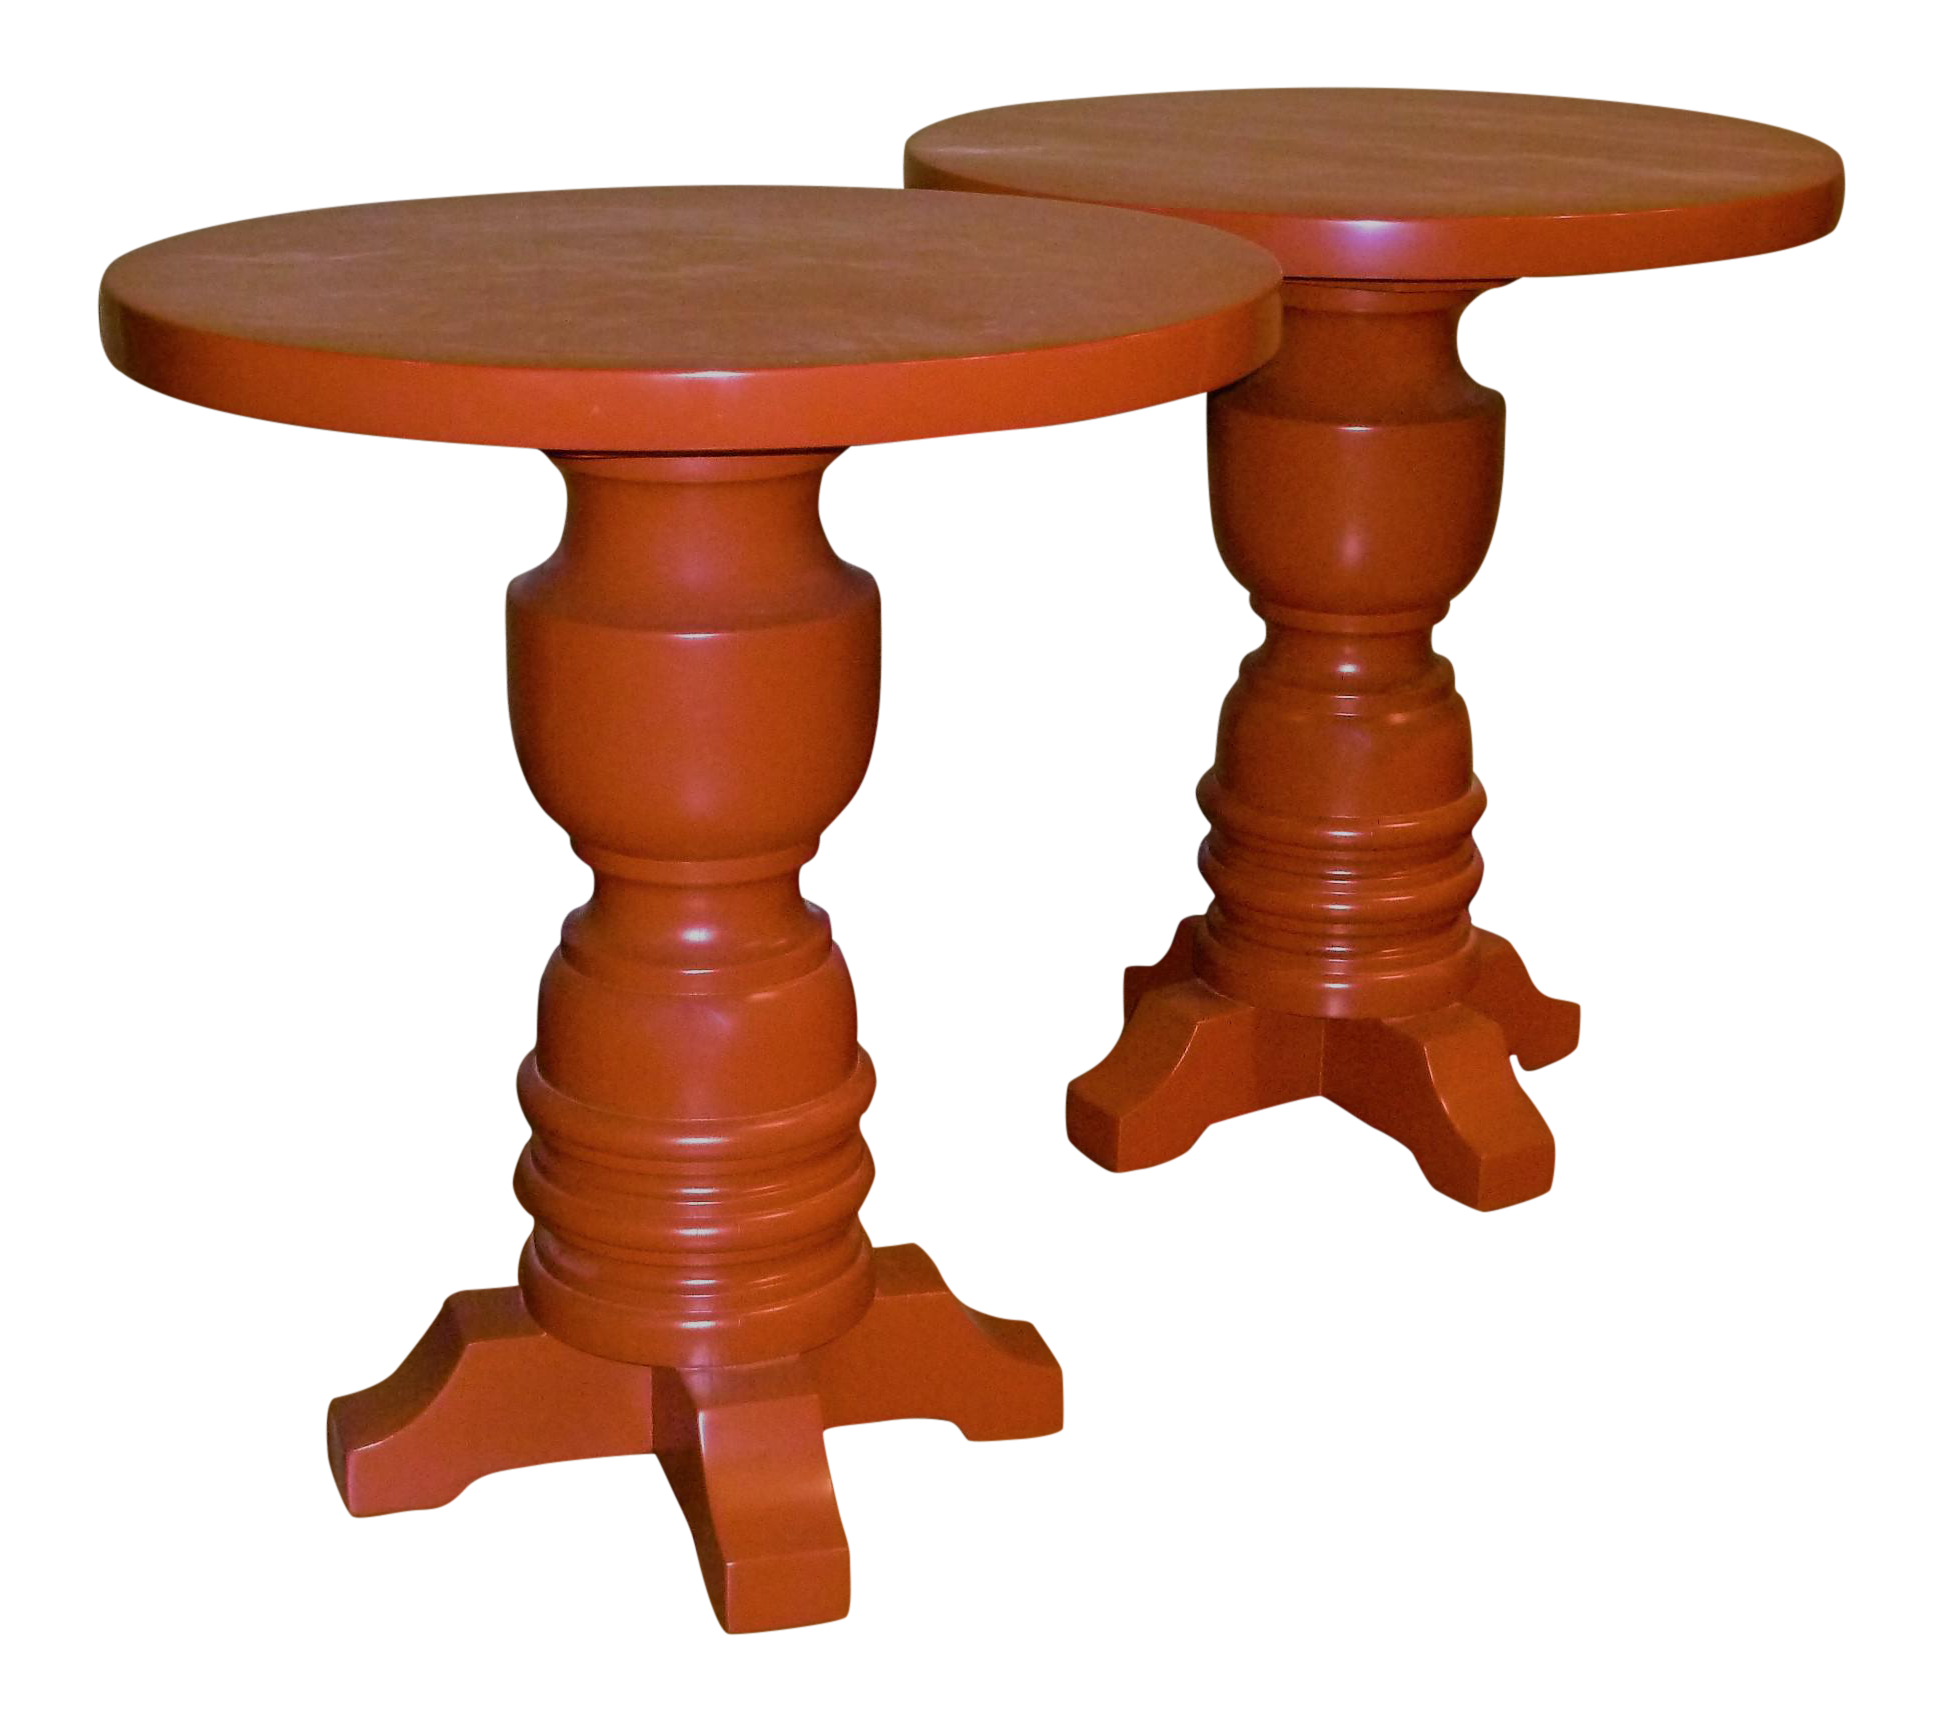 superb pair architectural mid century modern orange lacquered side tables outdoor table decaso console plastic furniture set two lamps bench hairpin accent desk short legs metal